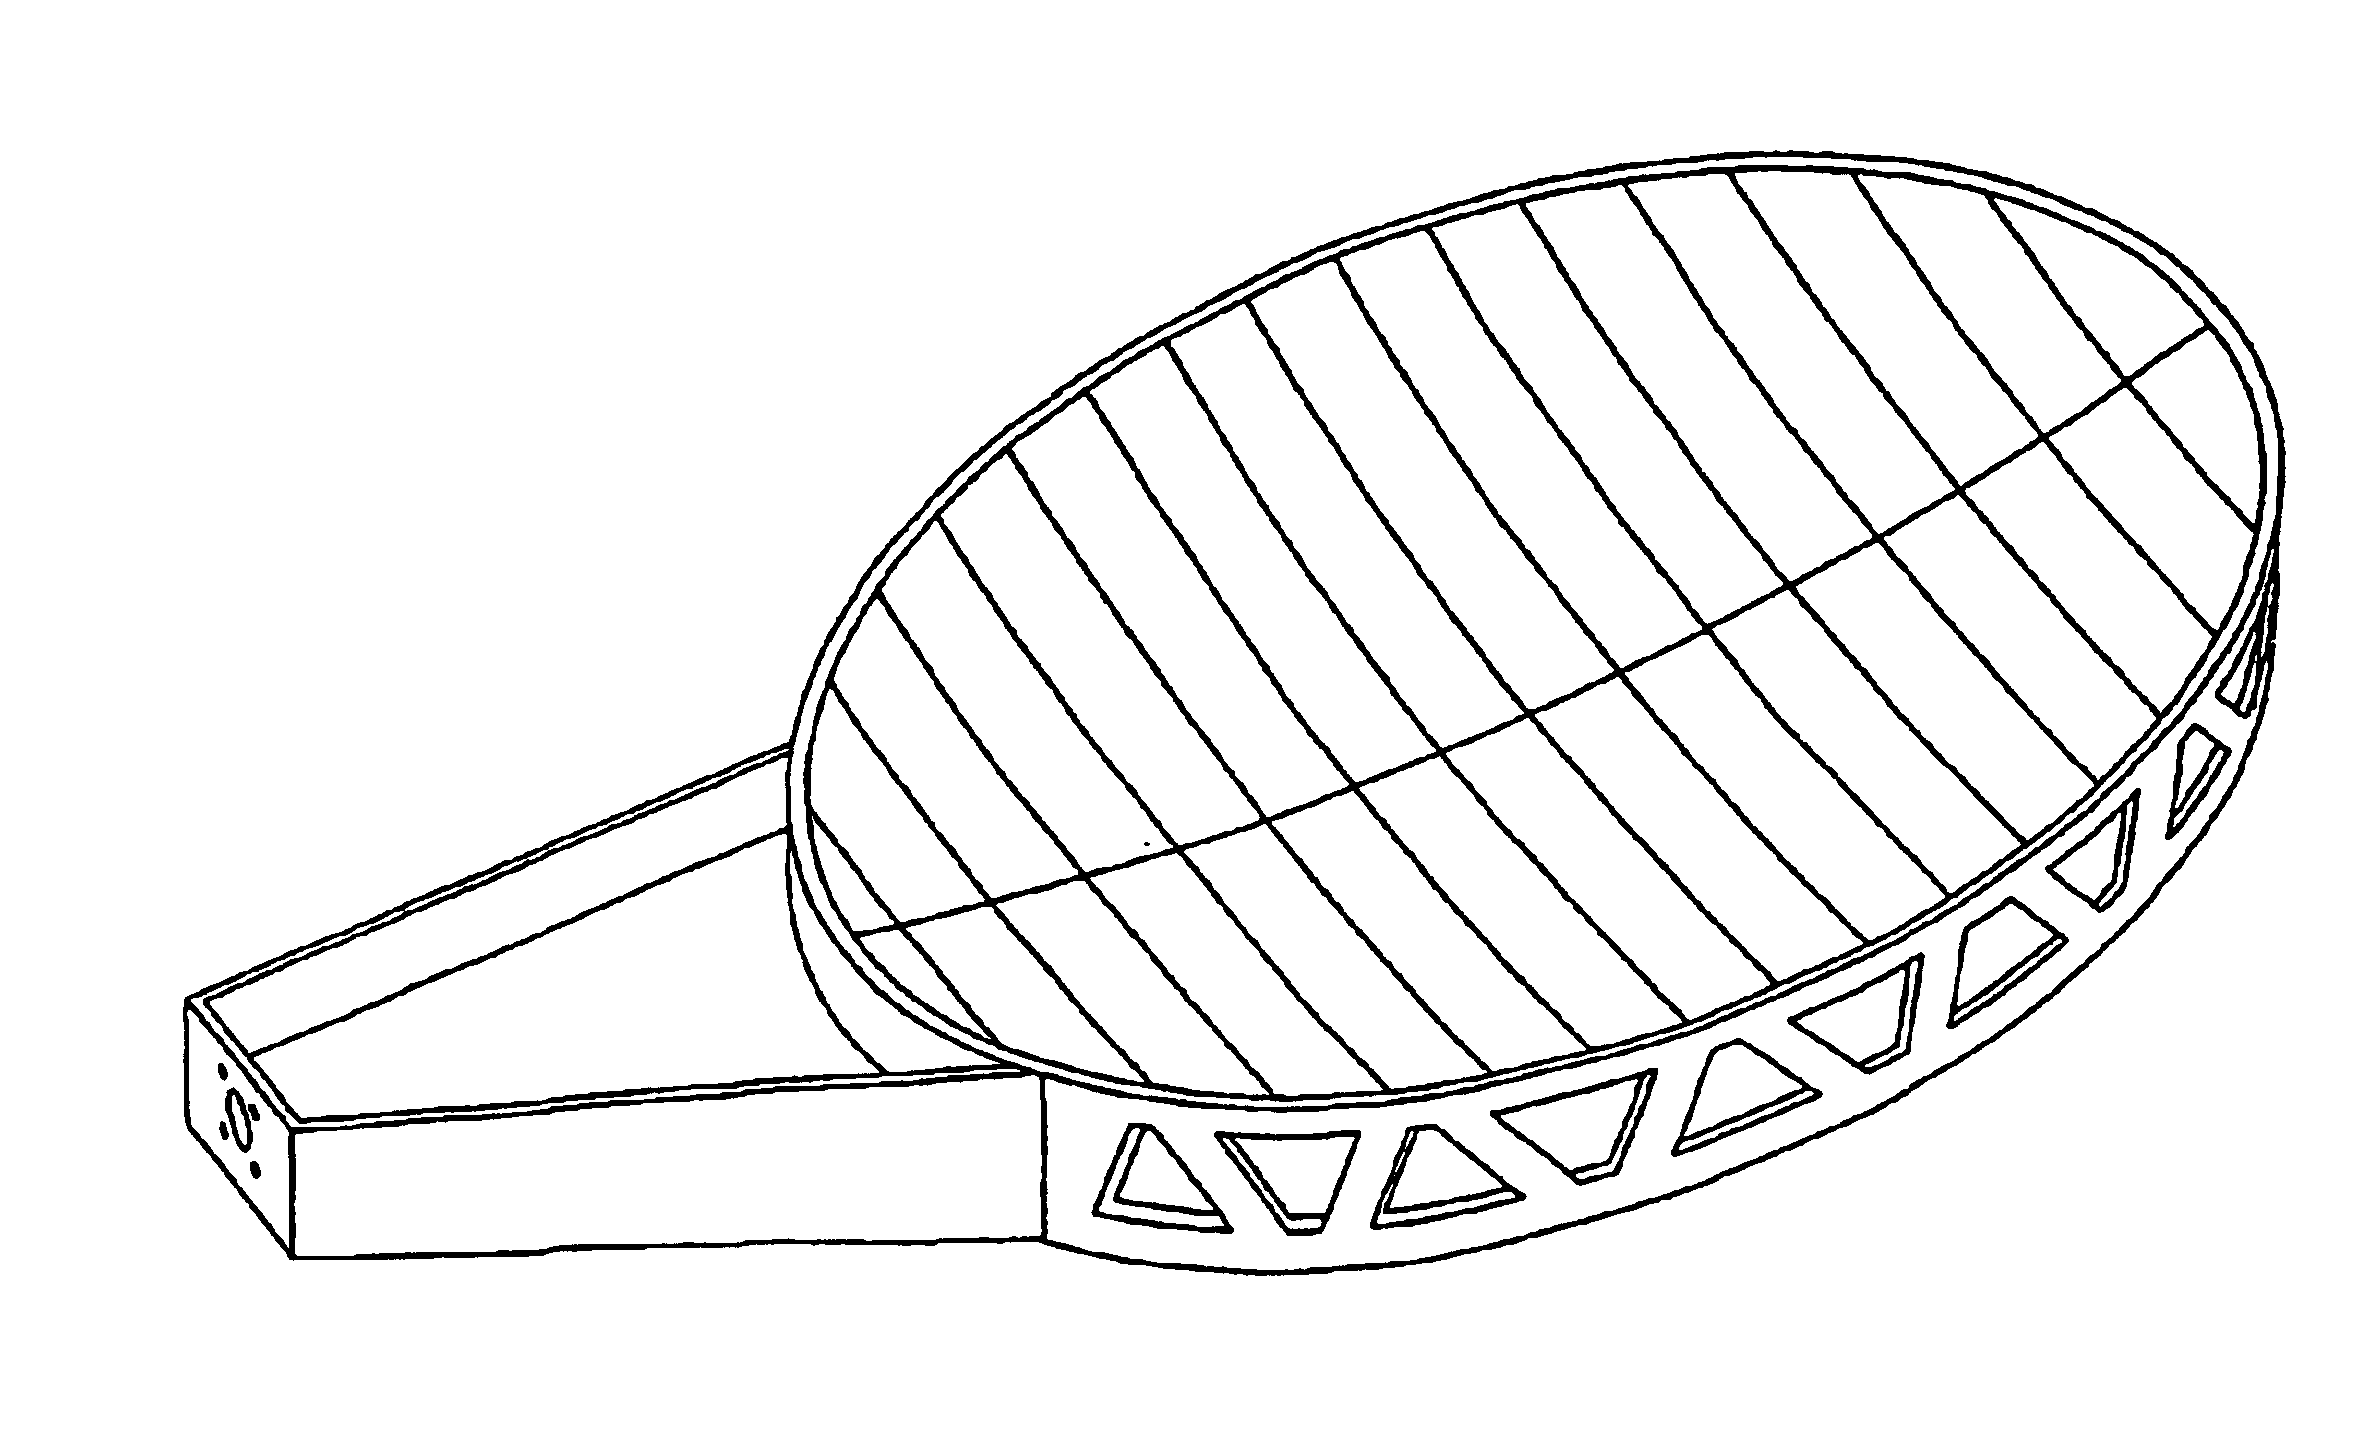 Reflector and antenna system containing reflectors